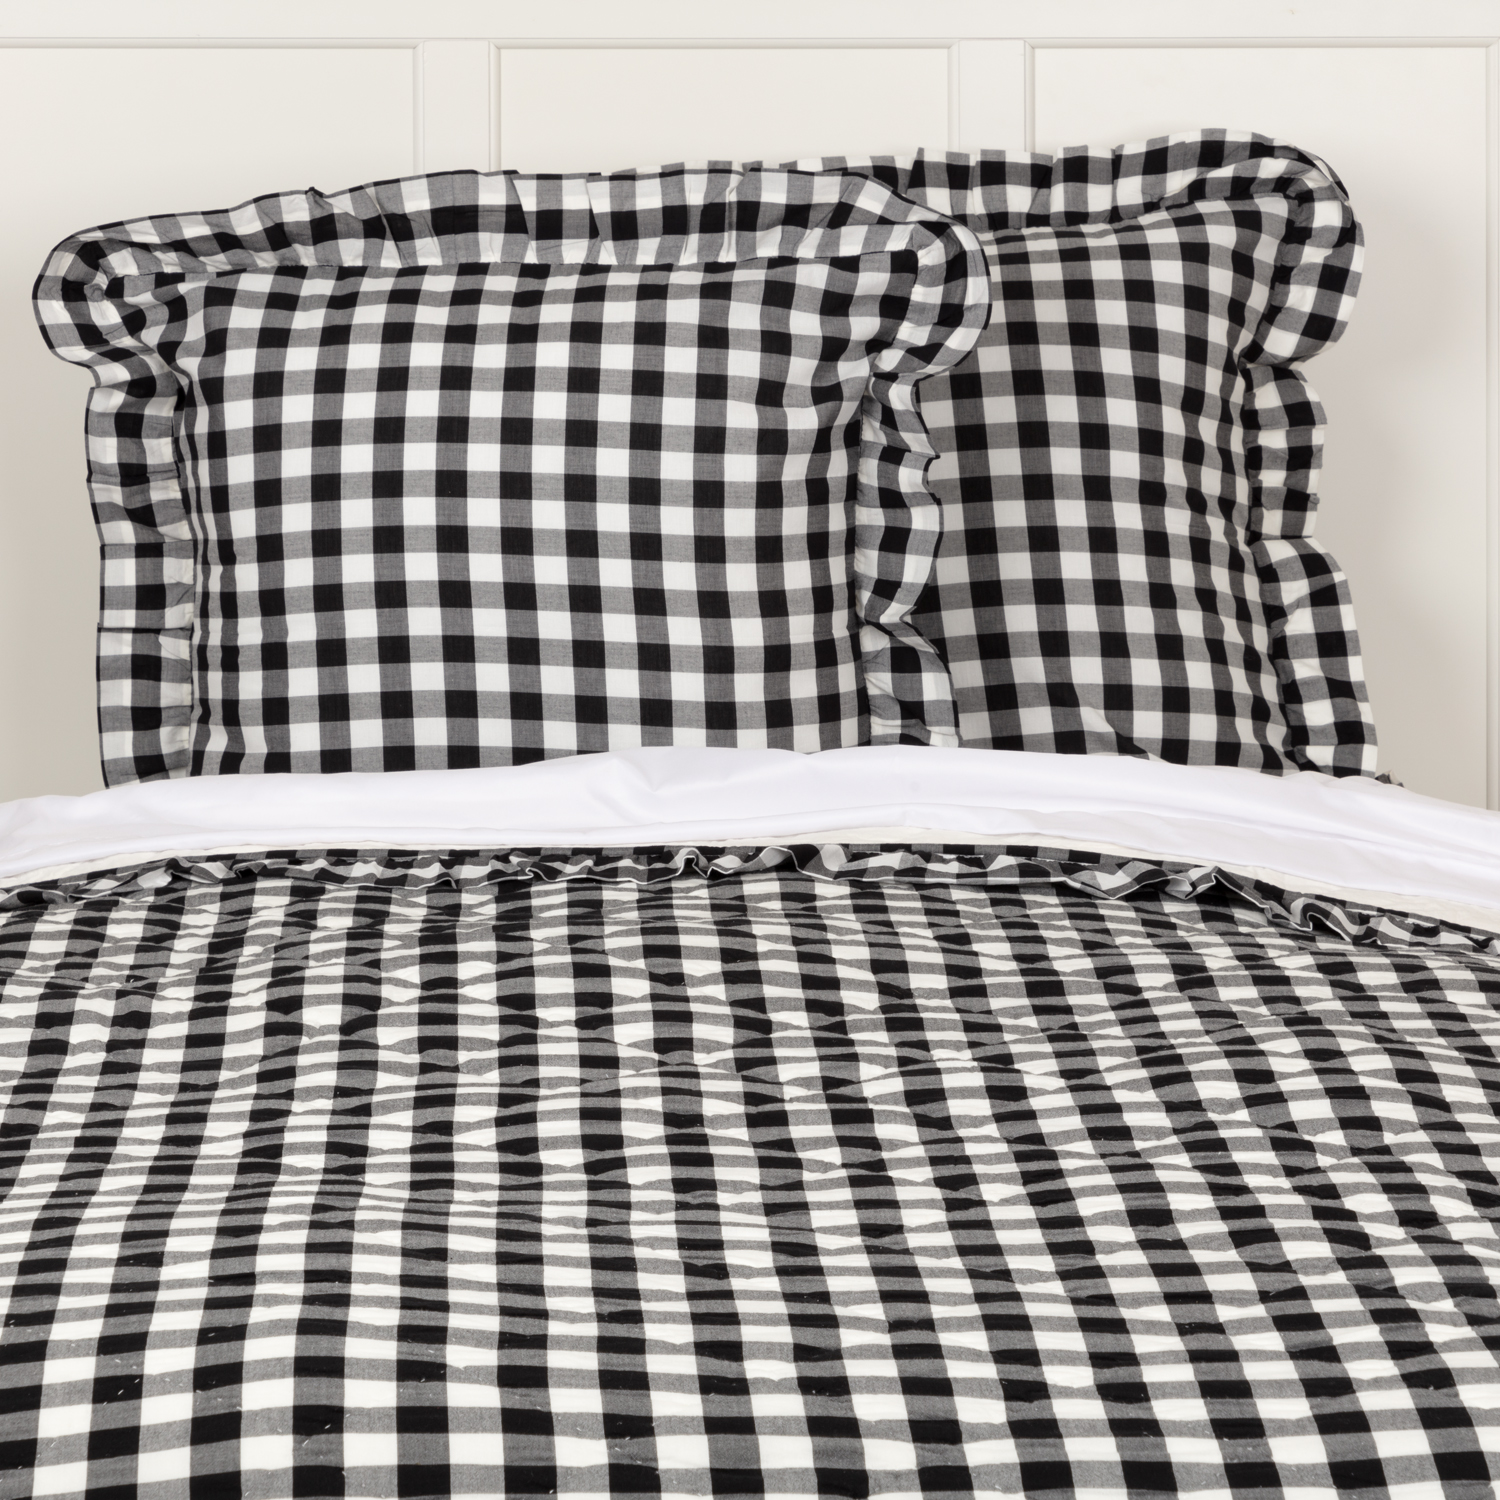 Black and White bedding